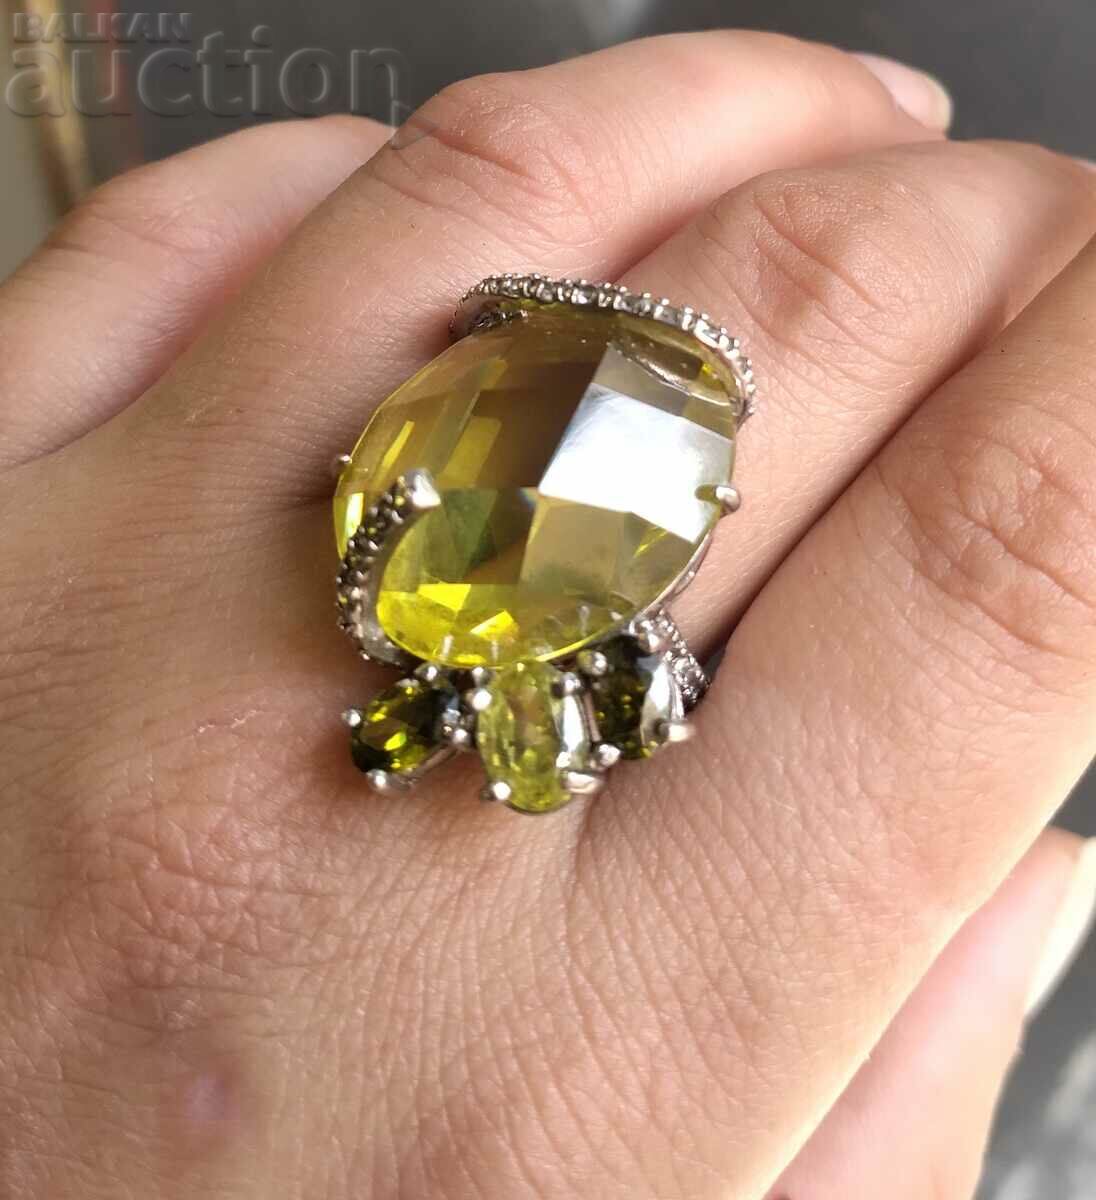 Silver Ring with Peridot